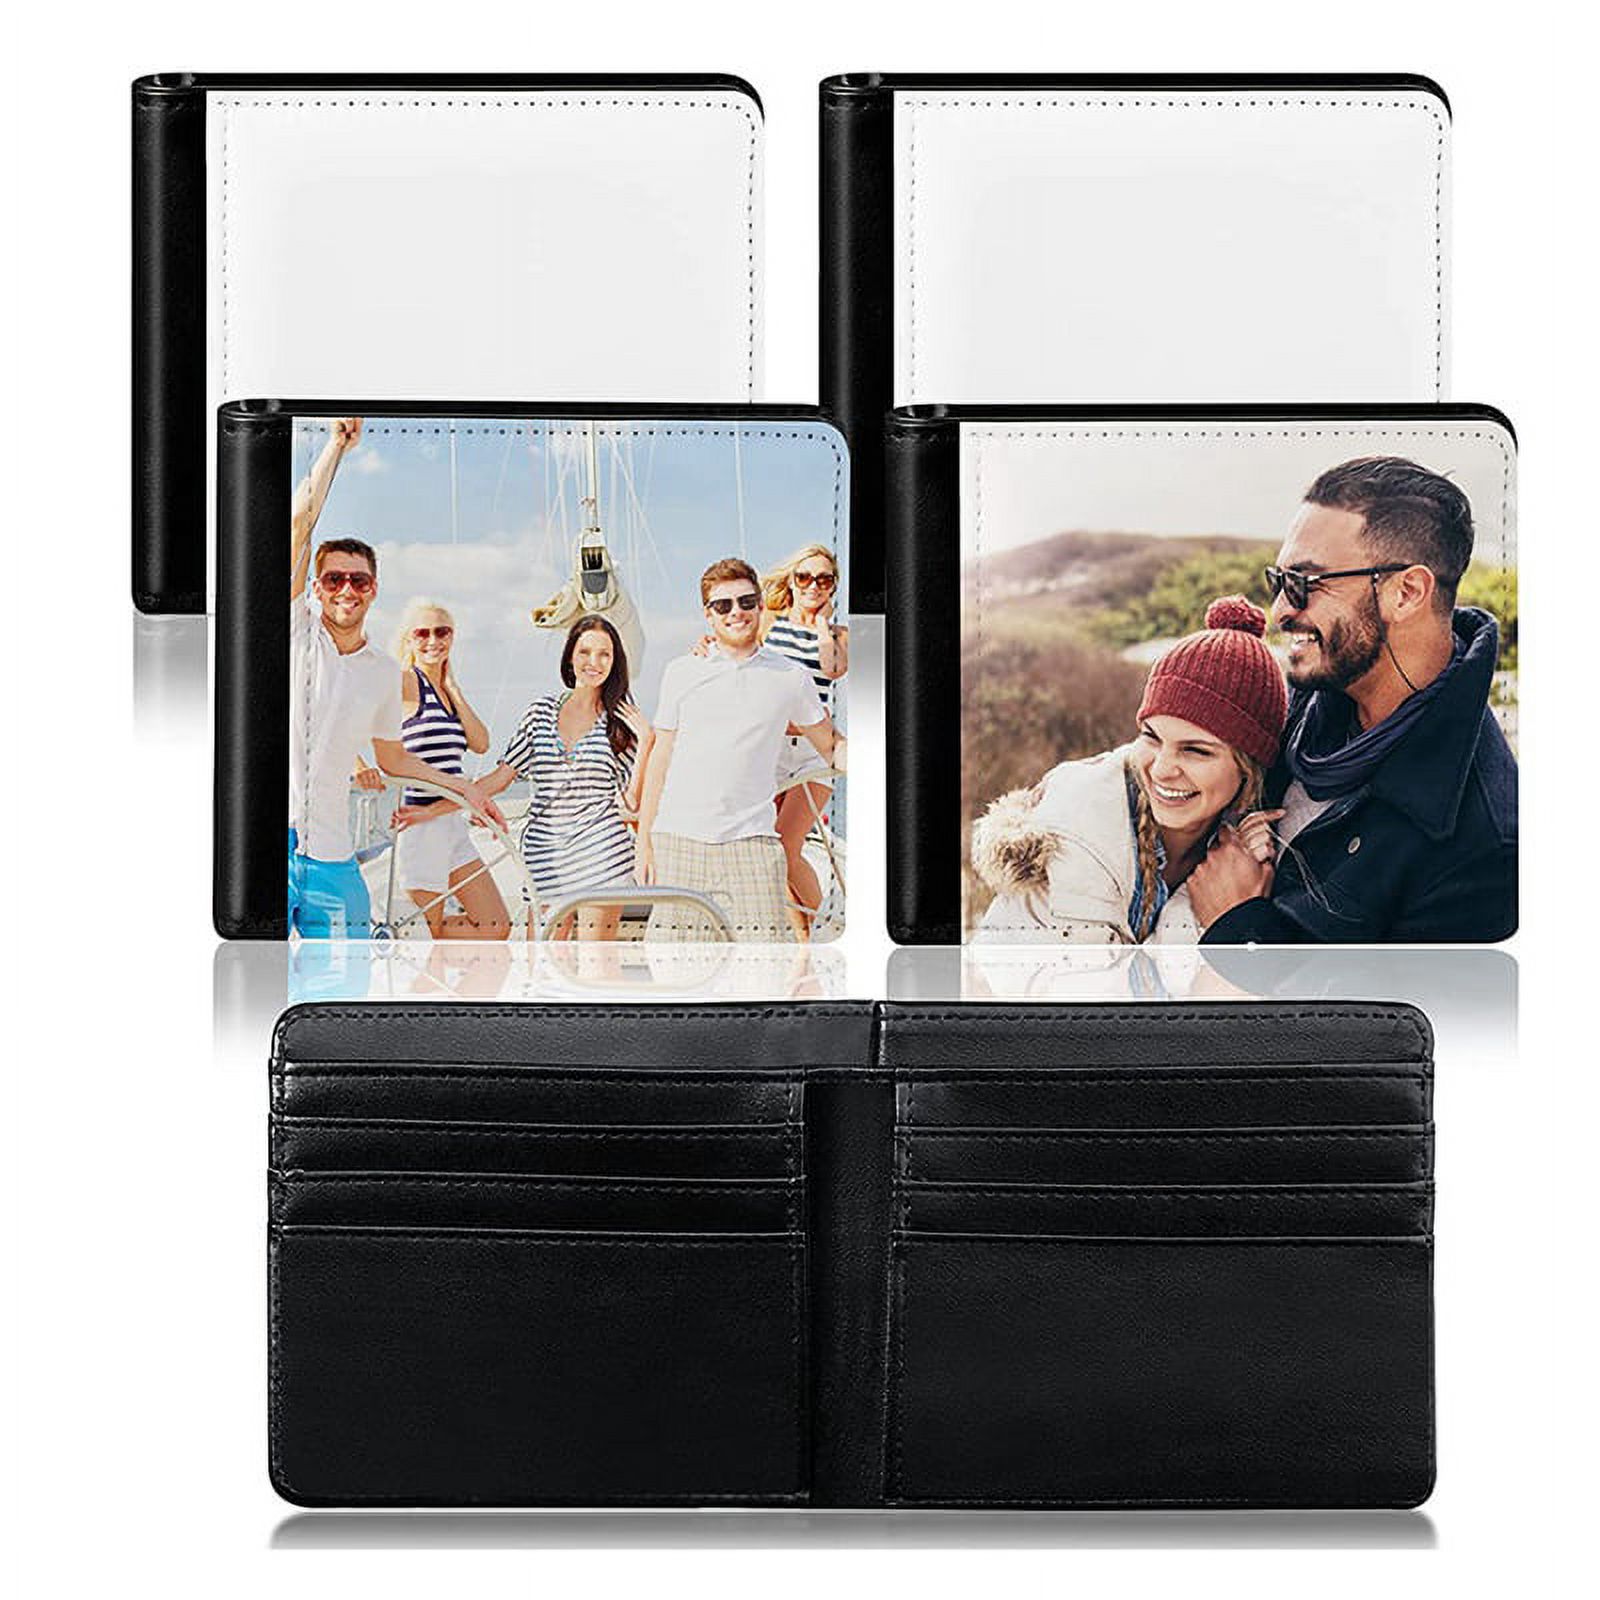 China 4pcs Sublimation Wallet Blank Heat Transfer Wallet Blank Sublimation Wallet with ID Windows for Travel Work Graduation, Women's, Size: One size